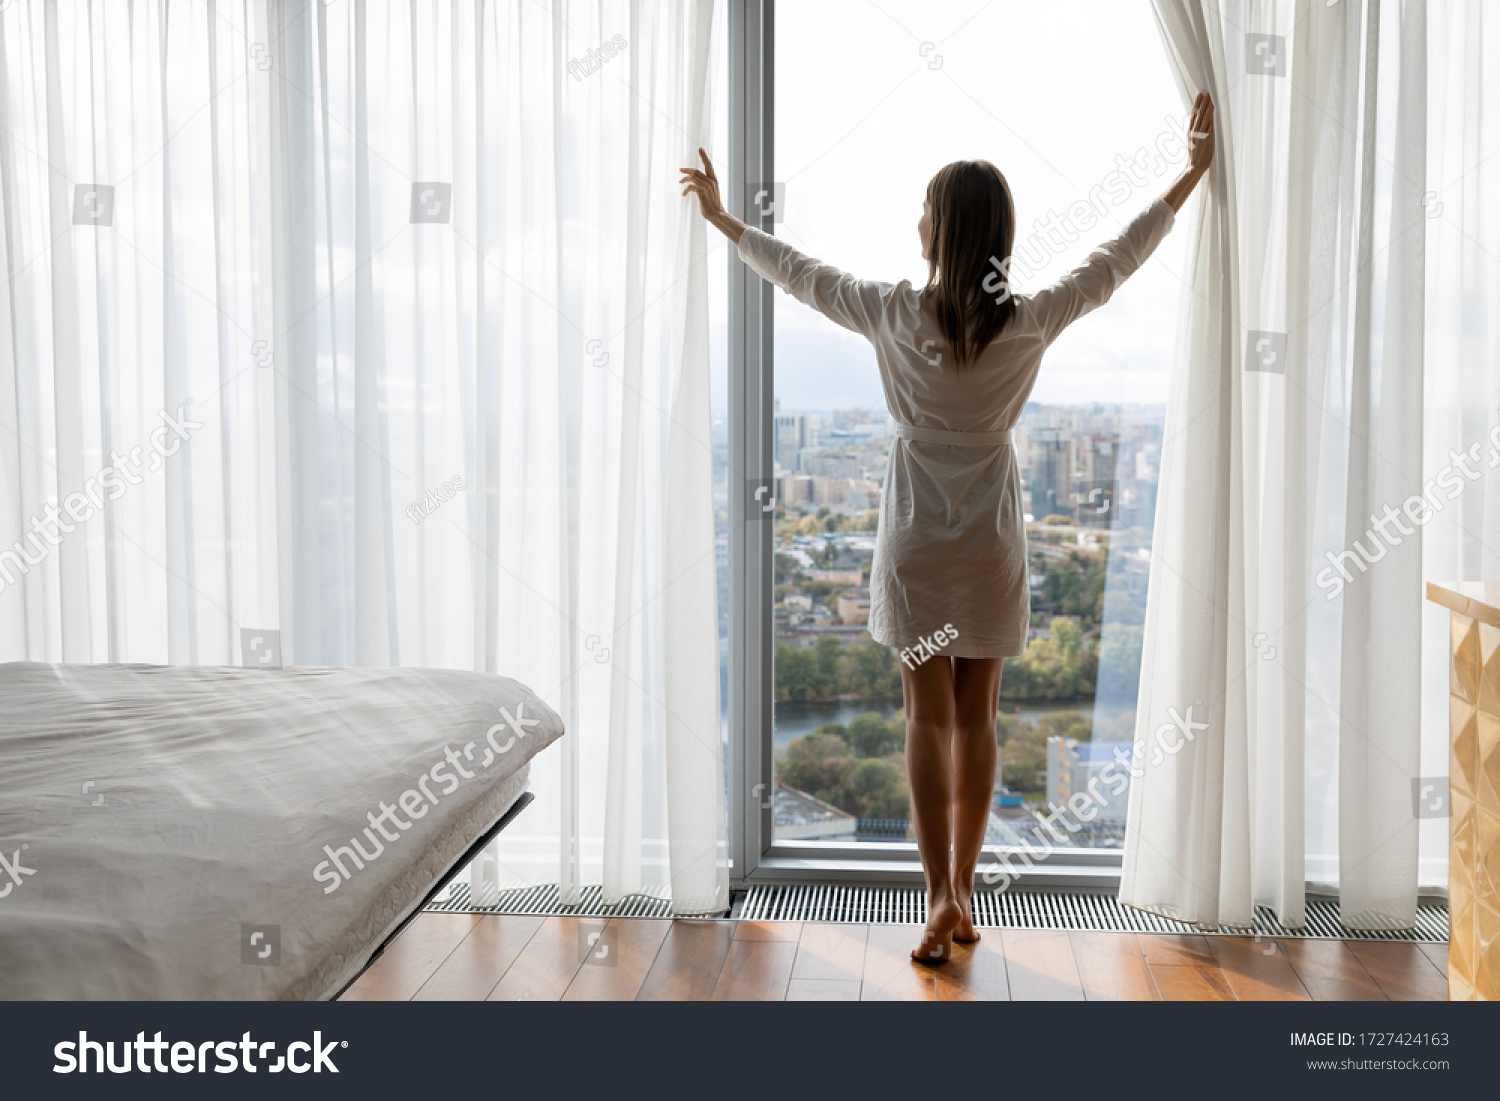 Rear full length of woman opened curtains enjoys big picturesque city standing barefoot on warm heated floor near panoramic window enjoy urban view, climate control at home, welcoming new day concept #1727424163